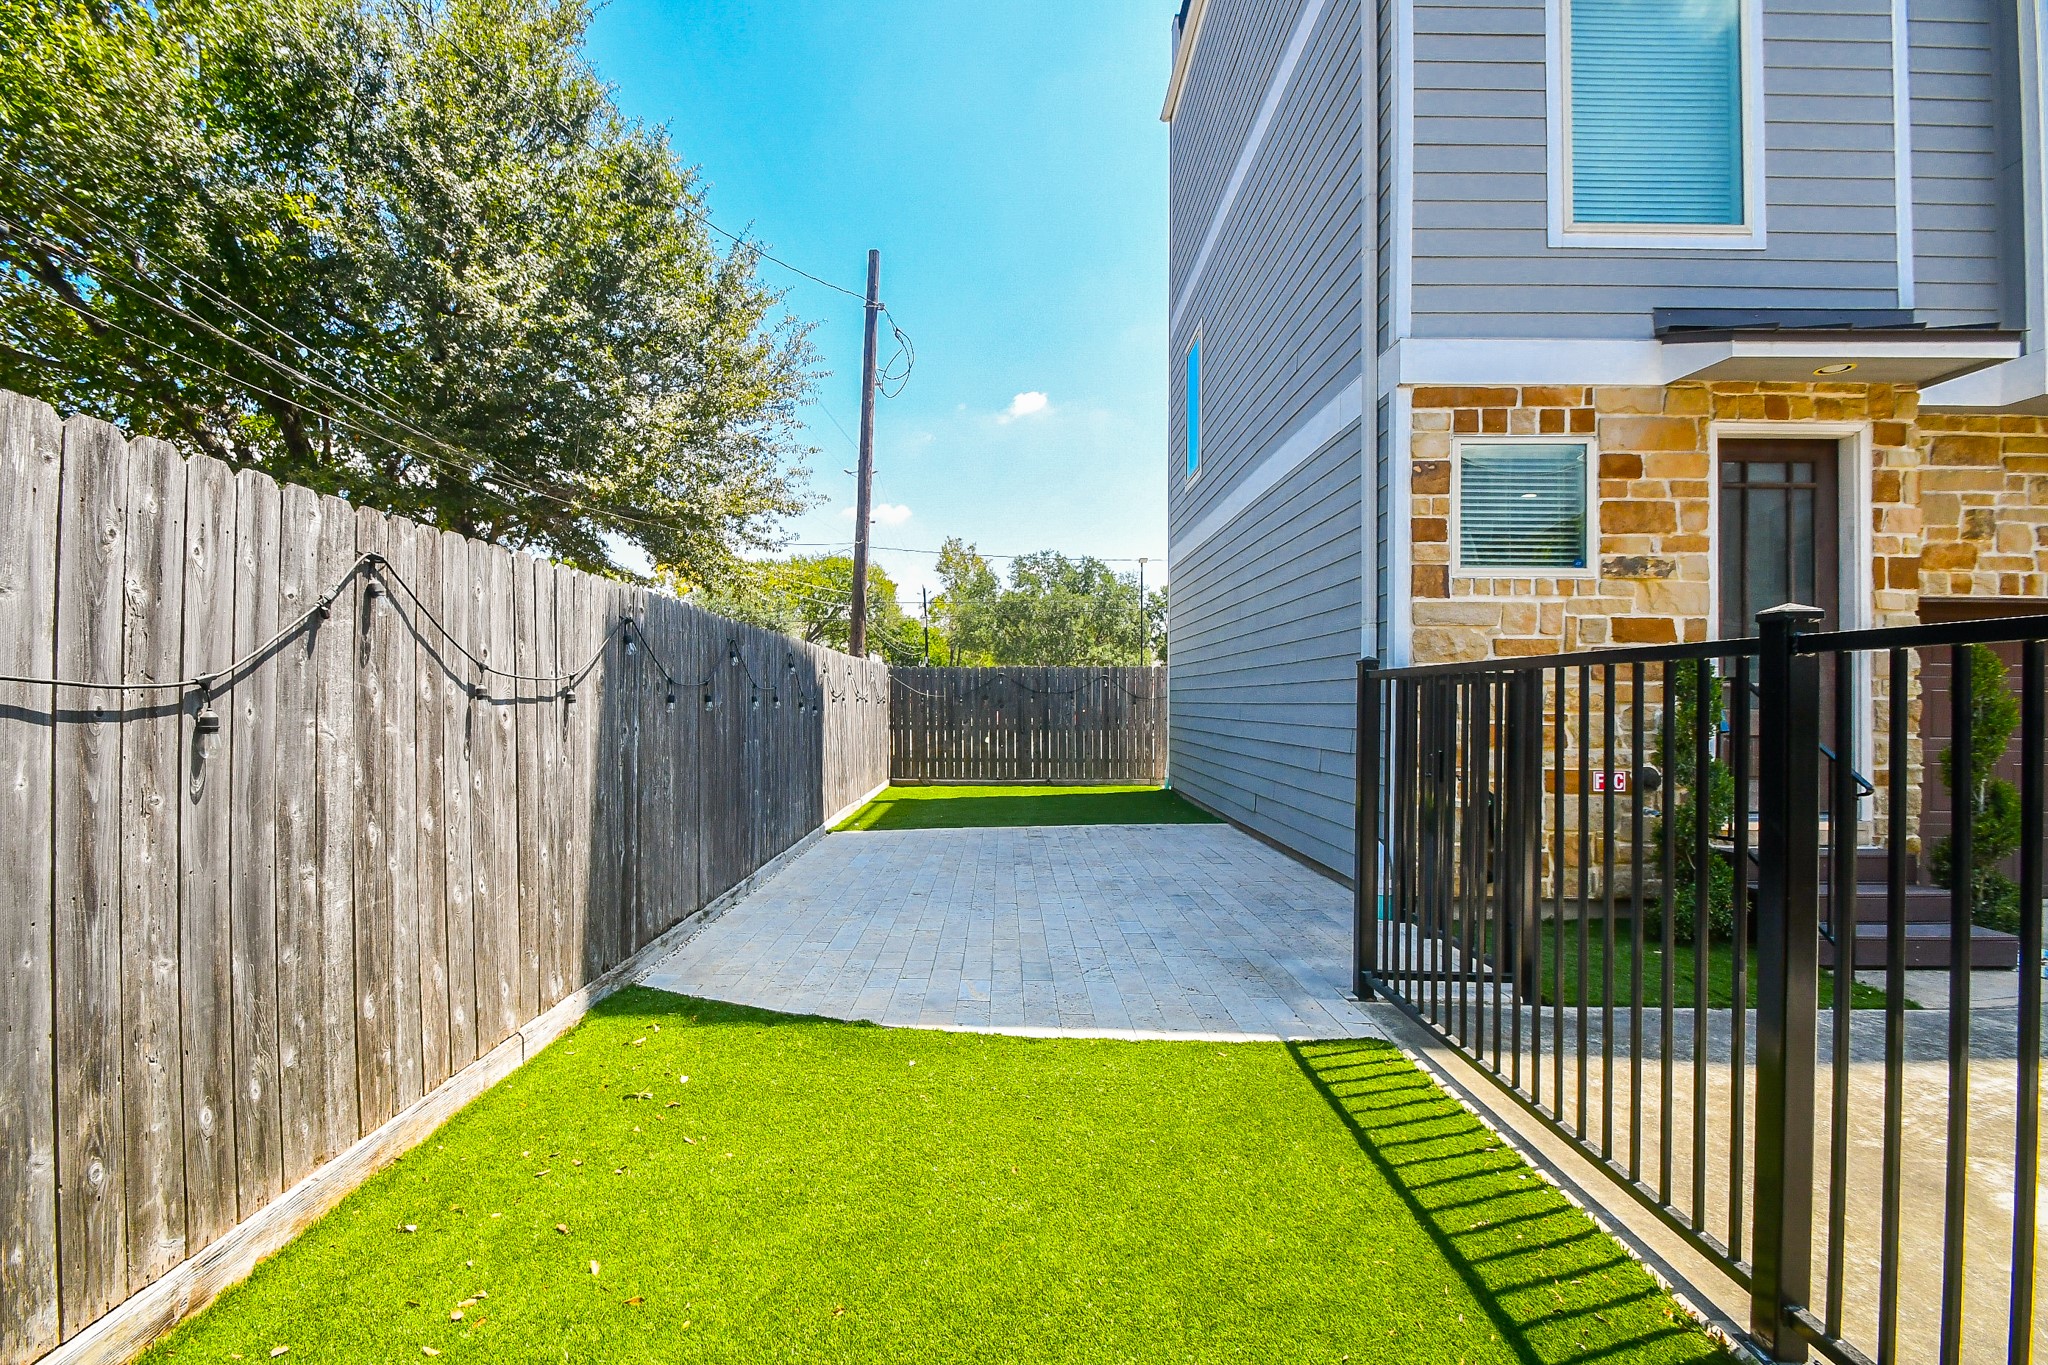 Fully Fenced private turfed side yard with stone-paved patio easily accessible from the front and back doors.